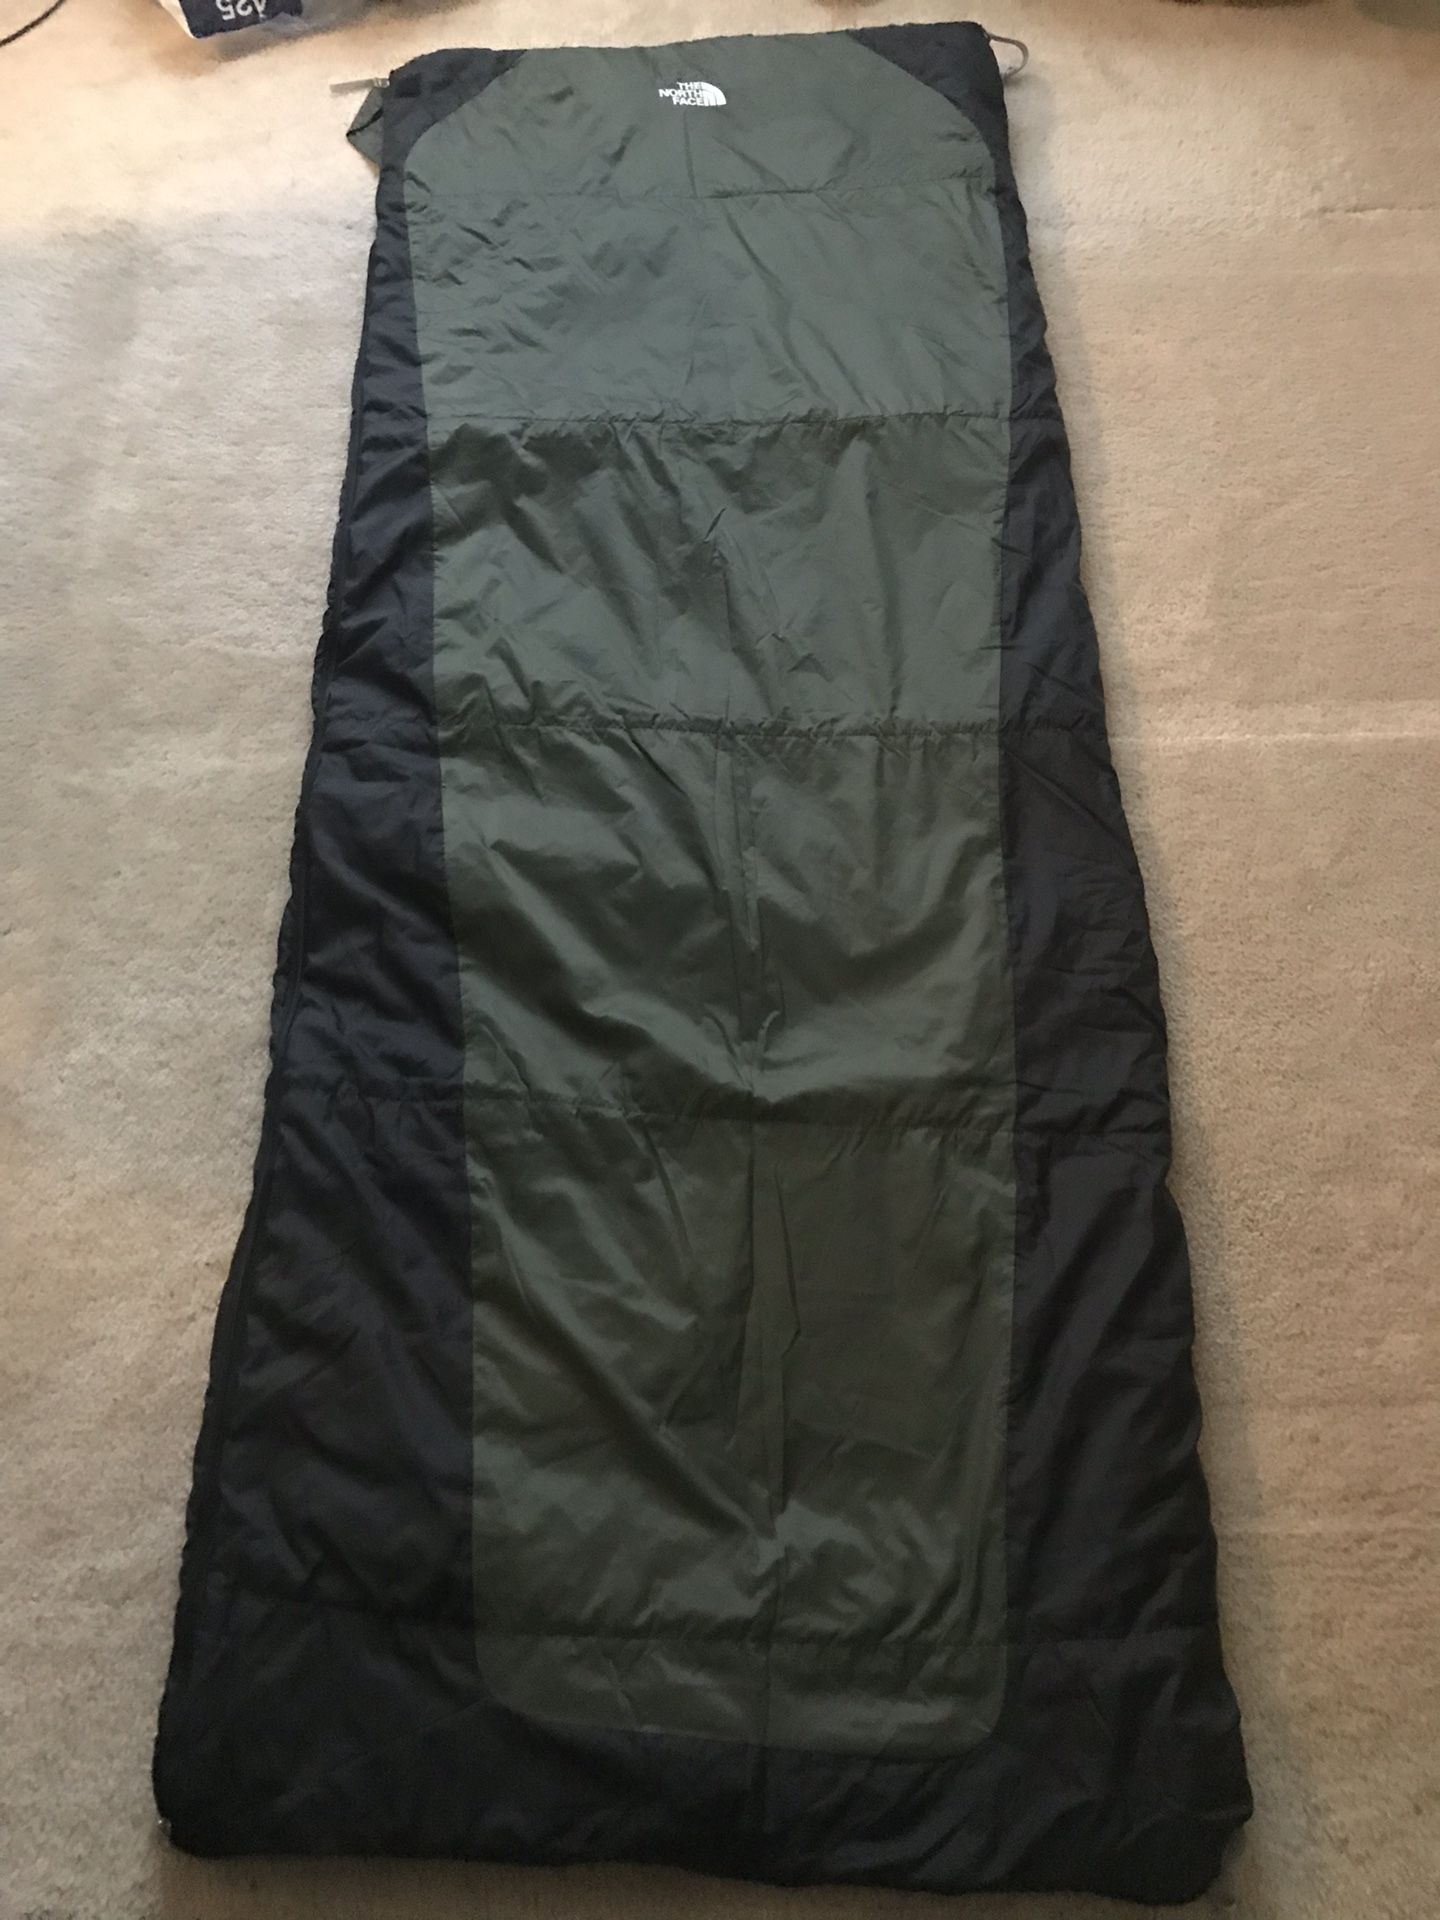 The North Face Allegheny 40F sleeping bag